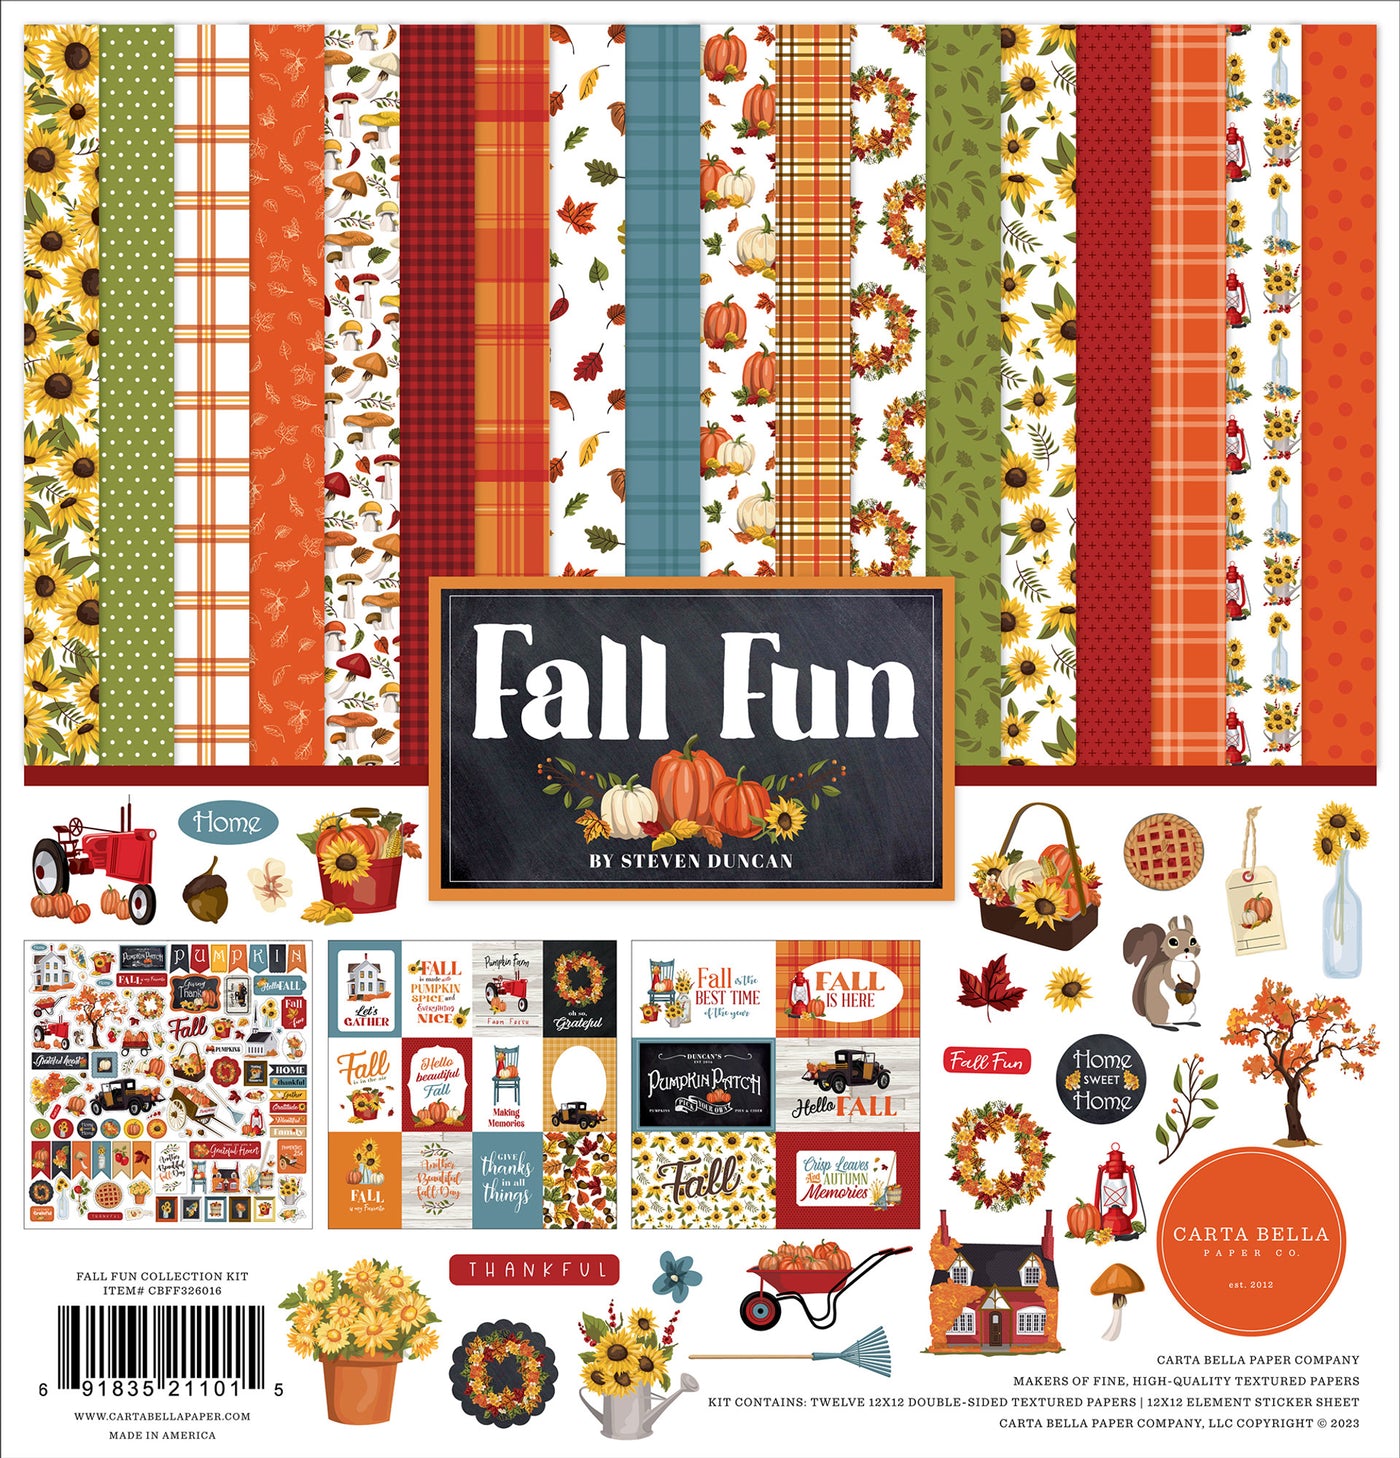 Twelve double-sided designer sheets with autumn designs and icons. Created by Steven Duncan. 12x12 inch cardstock. 80 lb. Felt texture. 